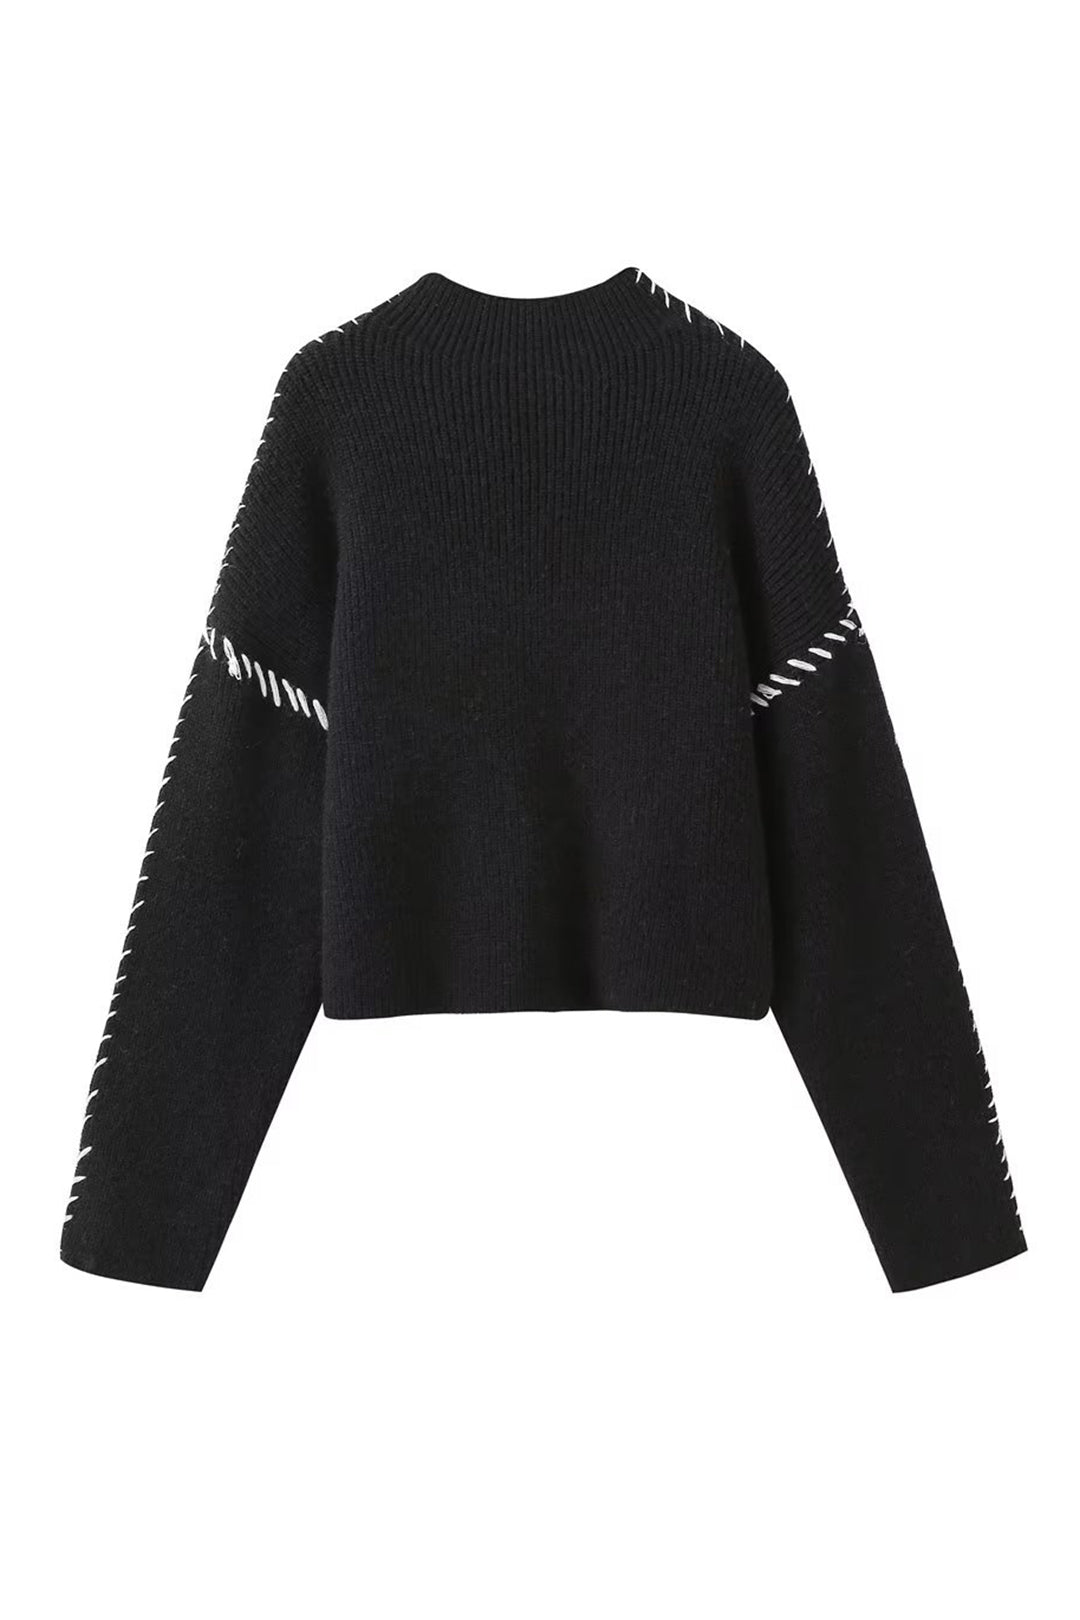 Contrast Whipstitching Turtleneck Long Sleeve Sweater